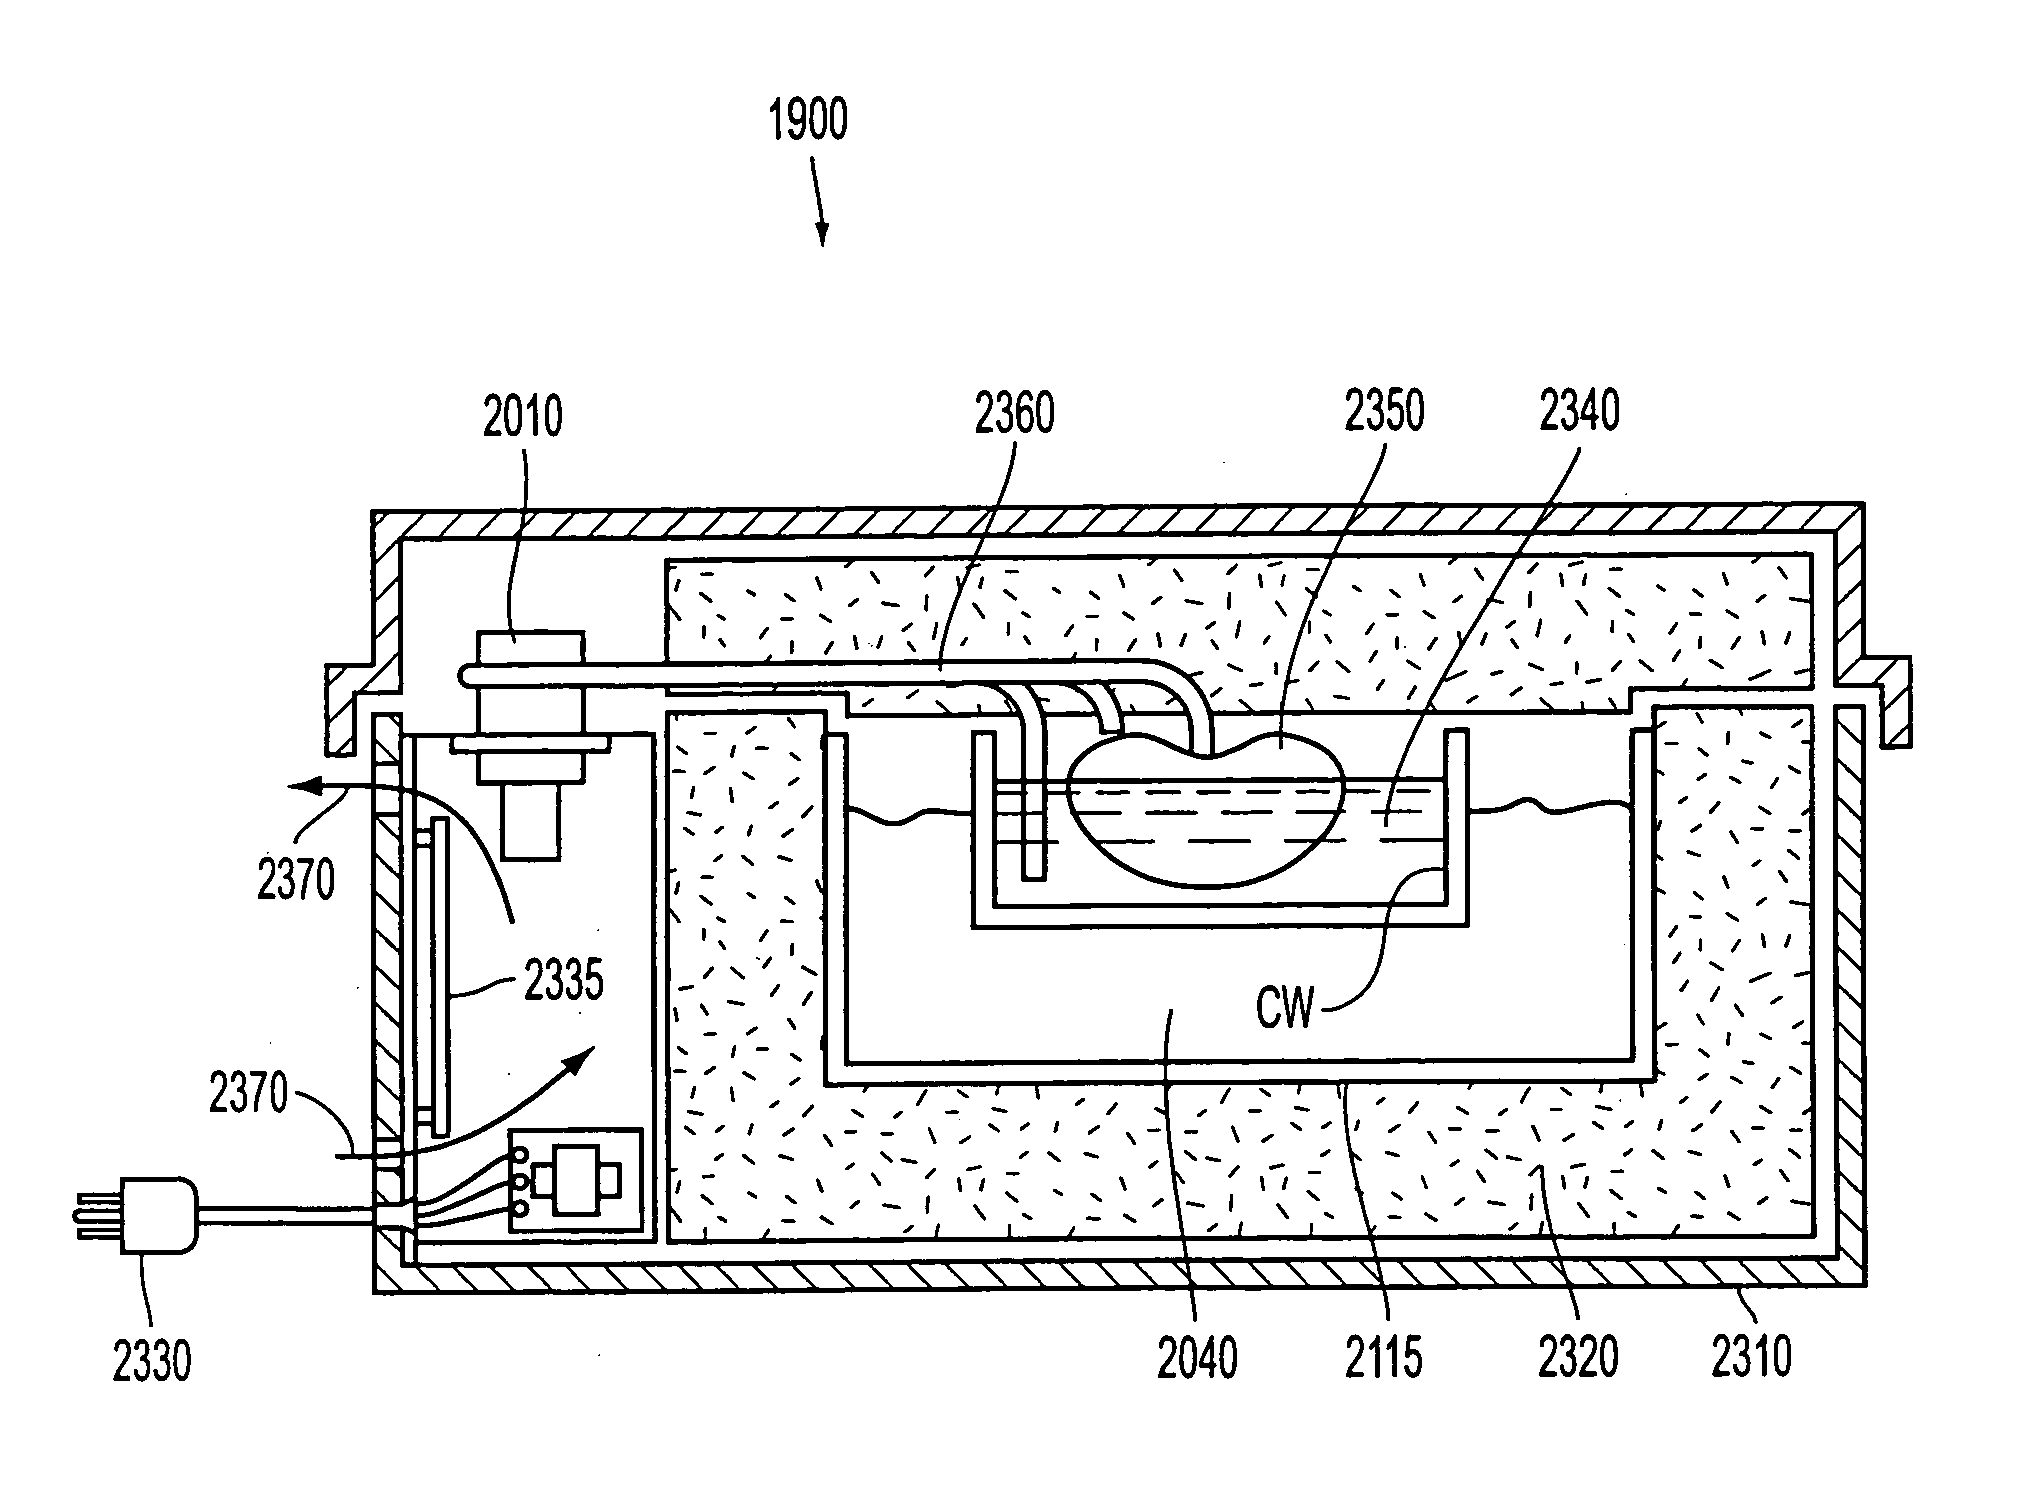 Method and apparatus for controlling air pressure in an organ or tissue container